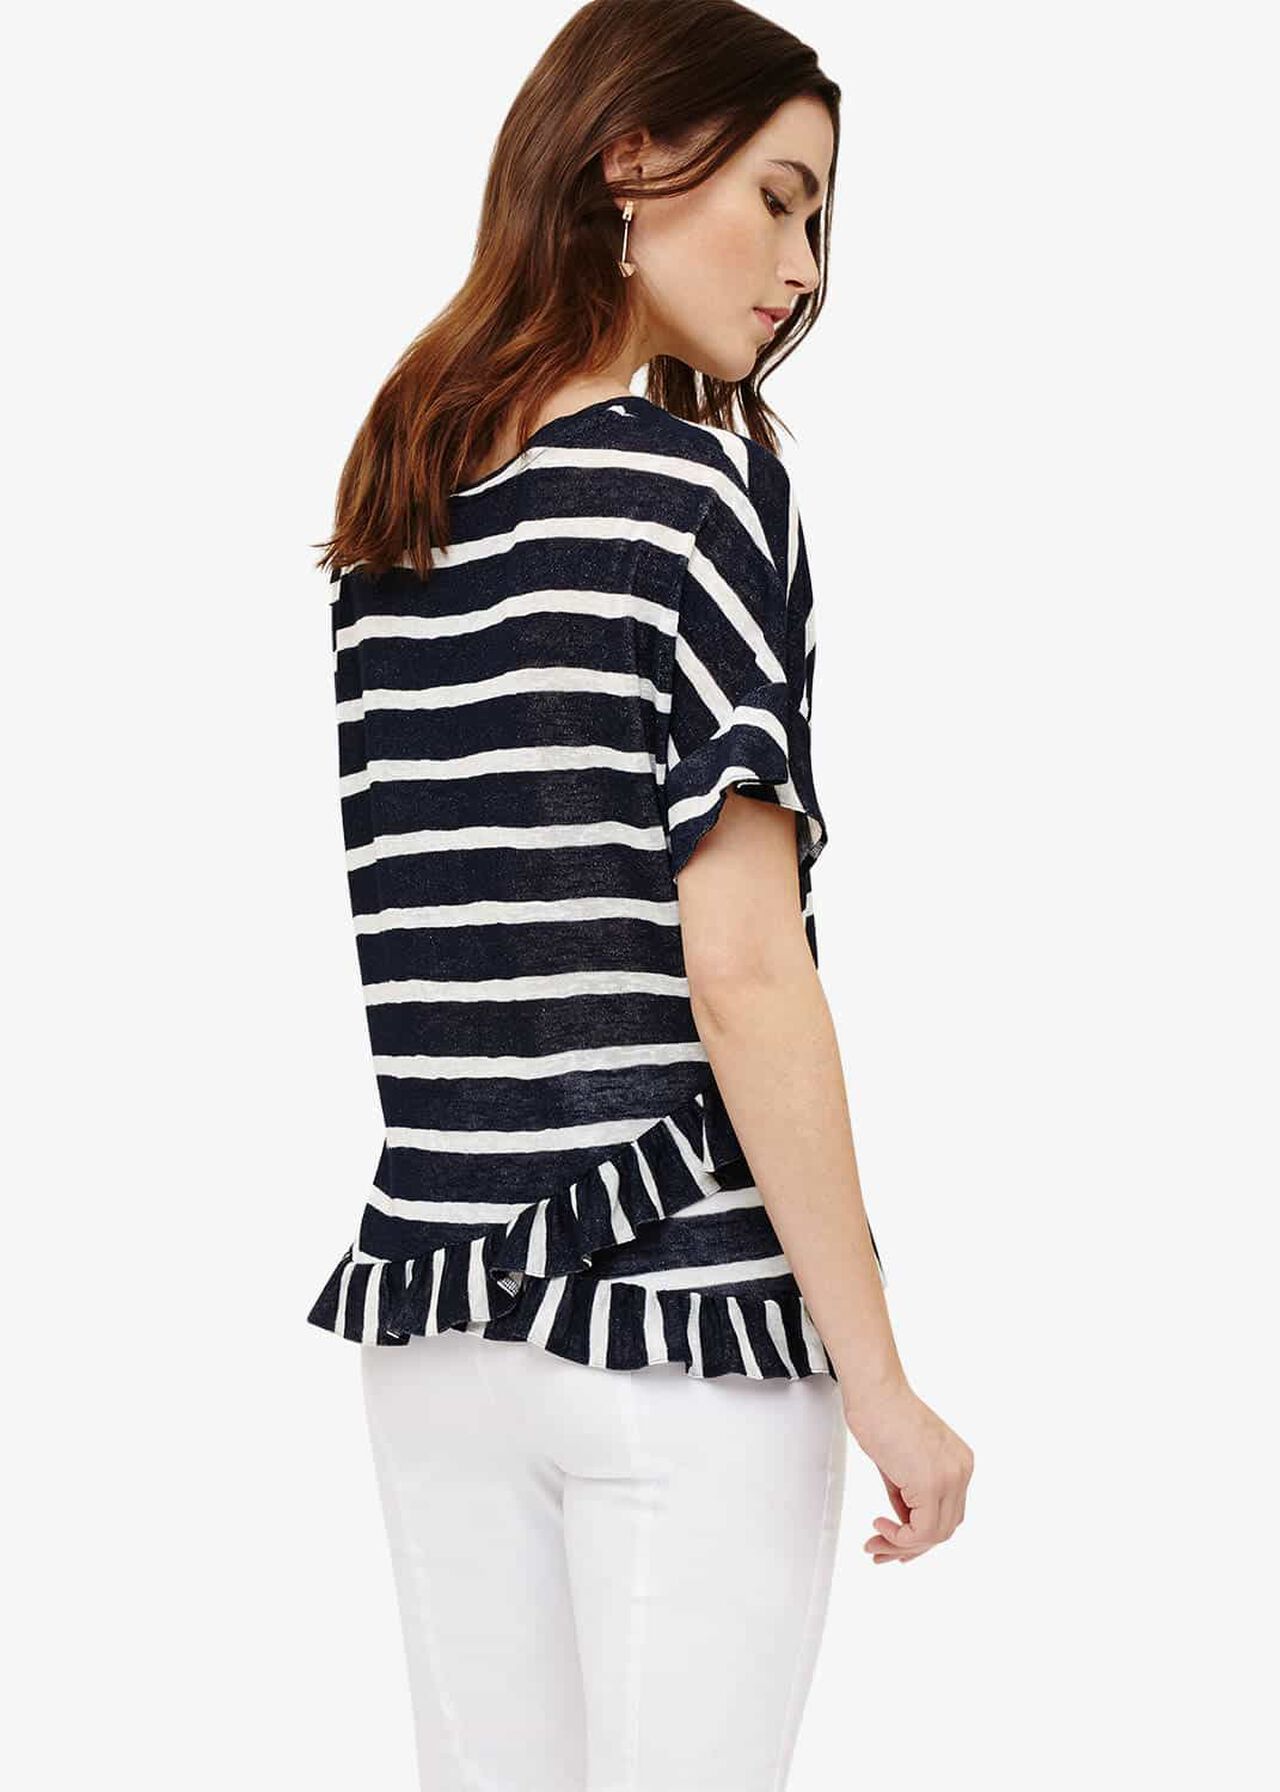 Shelby Striped Top